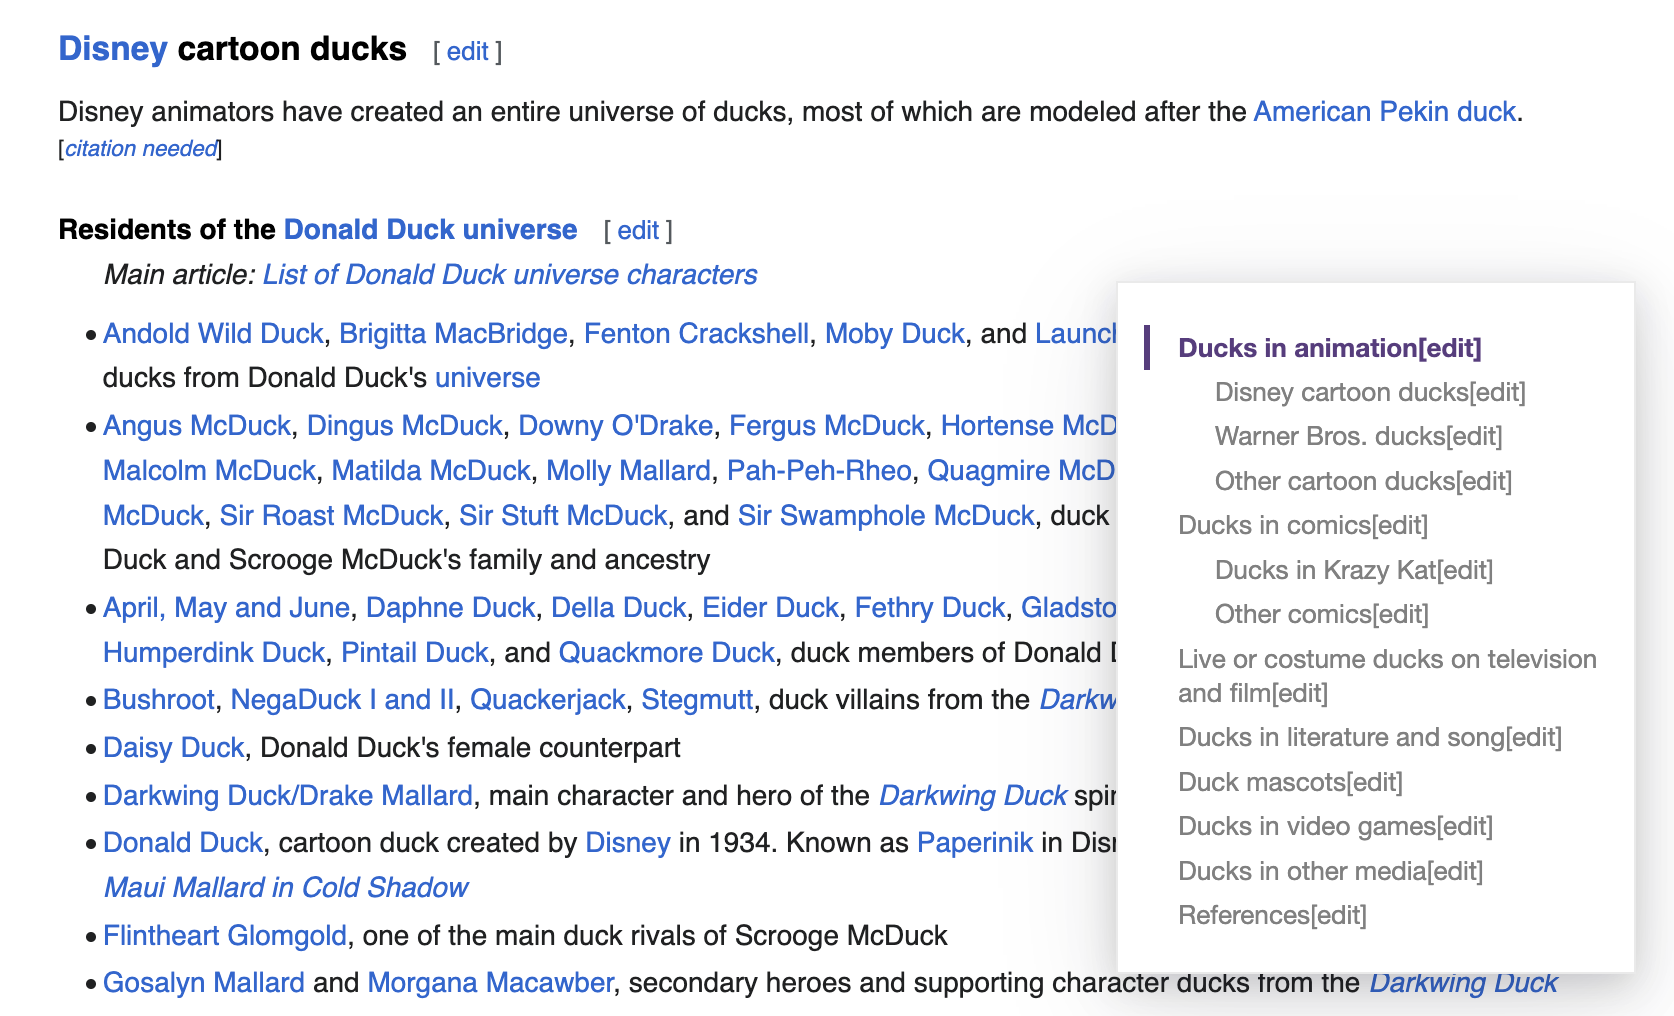 The Wikipedia list of fictional ducks in Disney's Donald Duck universe, with a table of contents created by the Smart TOC browser extension.